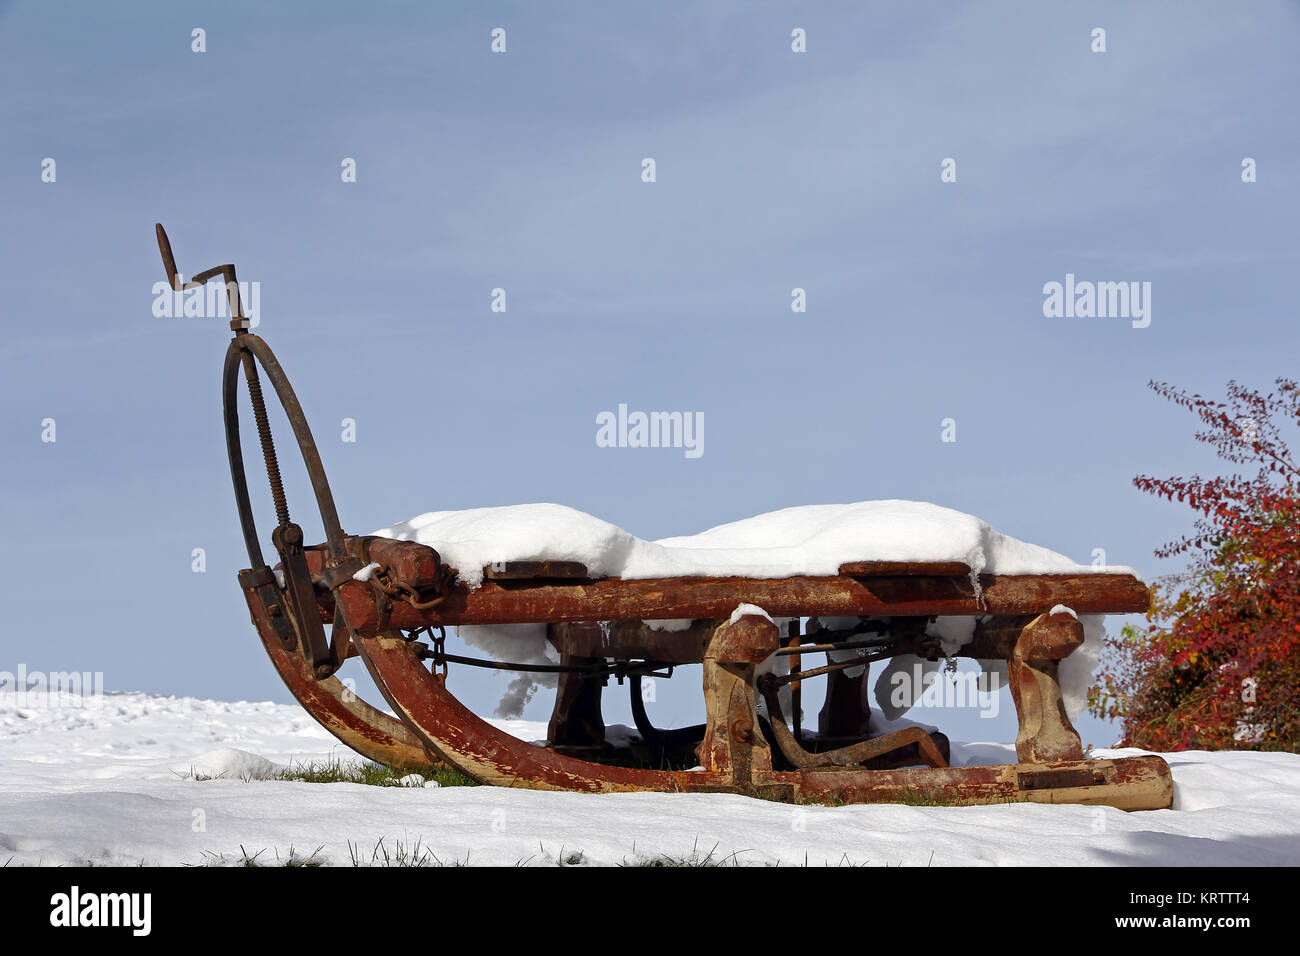 an old sleigh in winter. old transport carriage in the snow Stock Photo